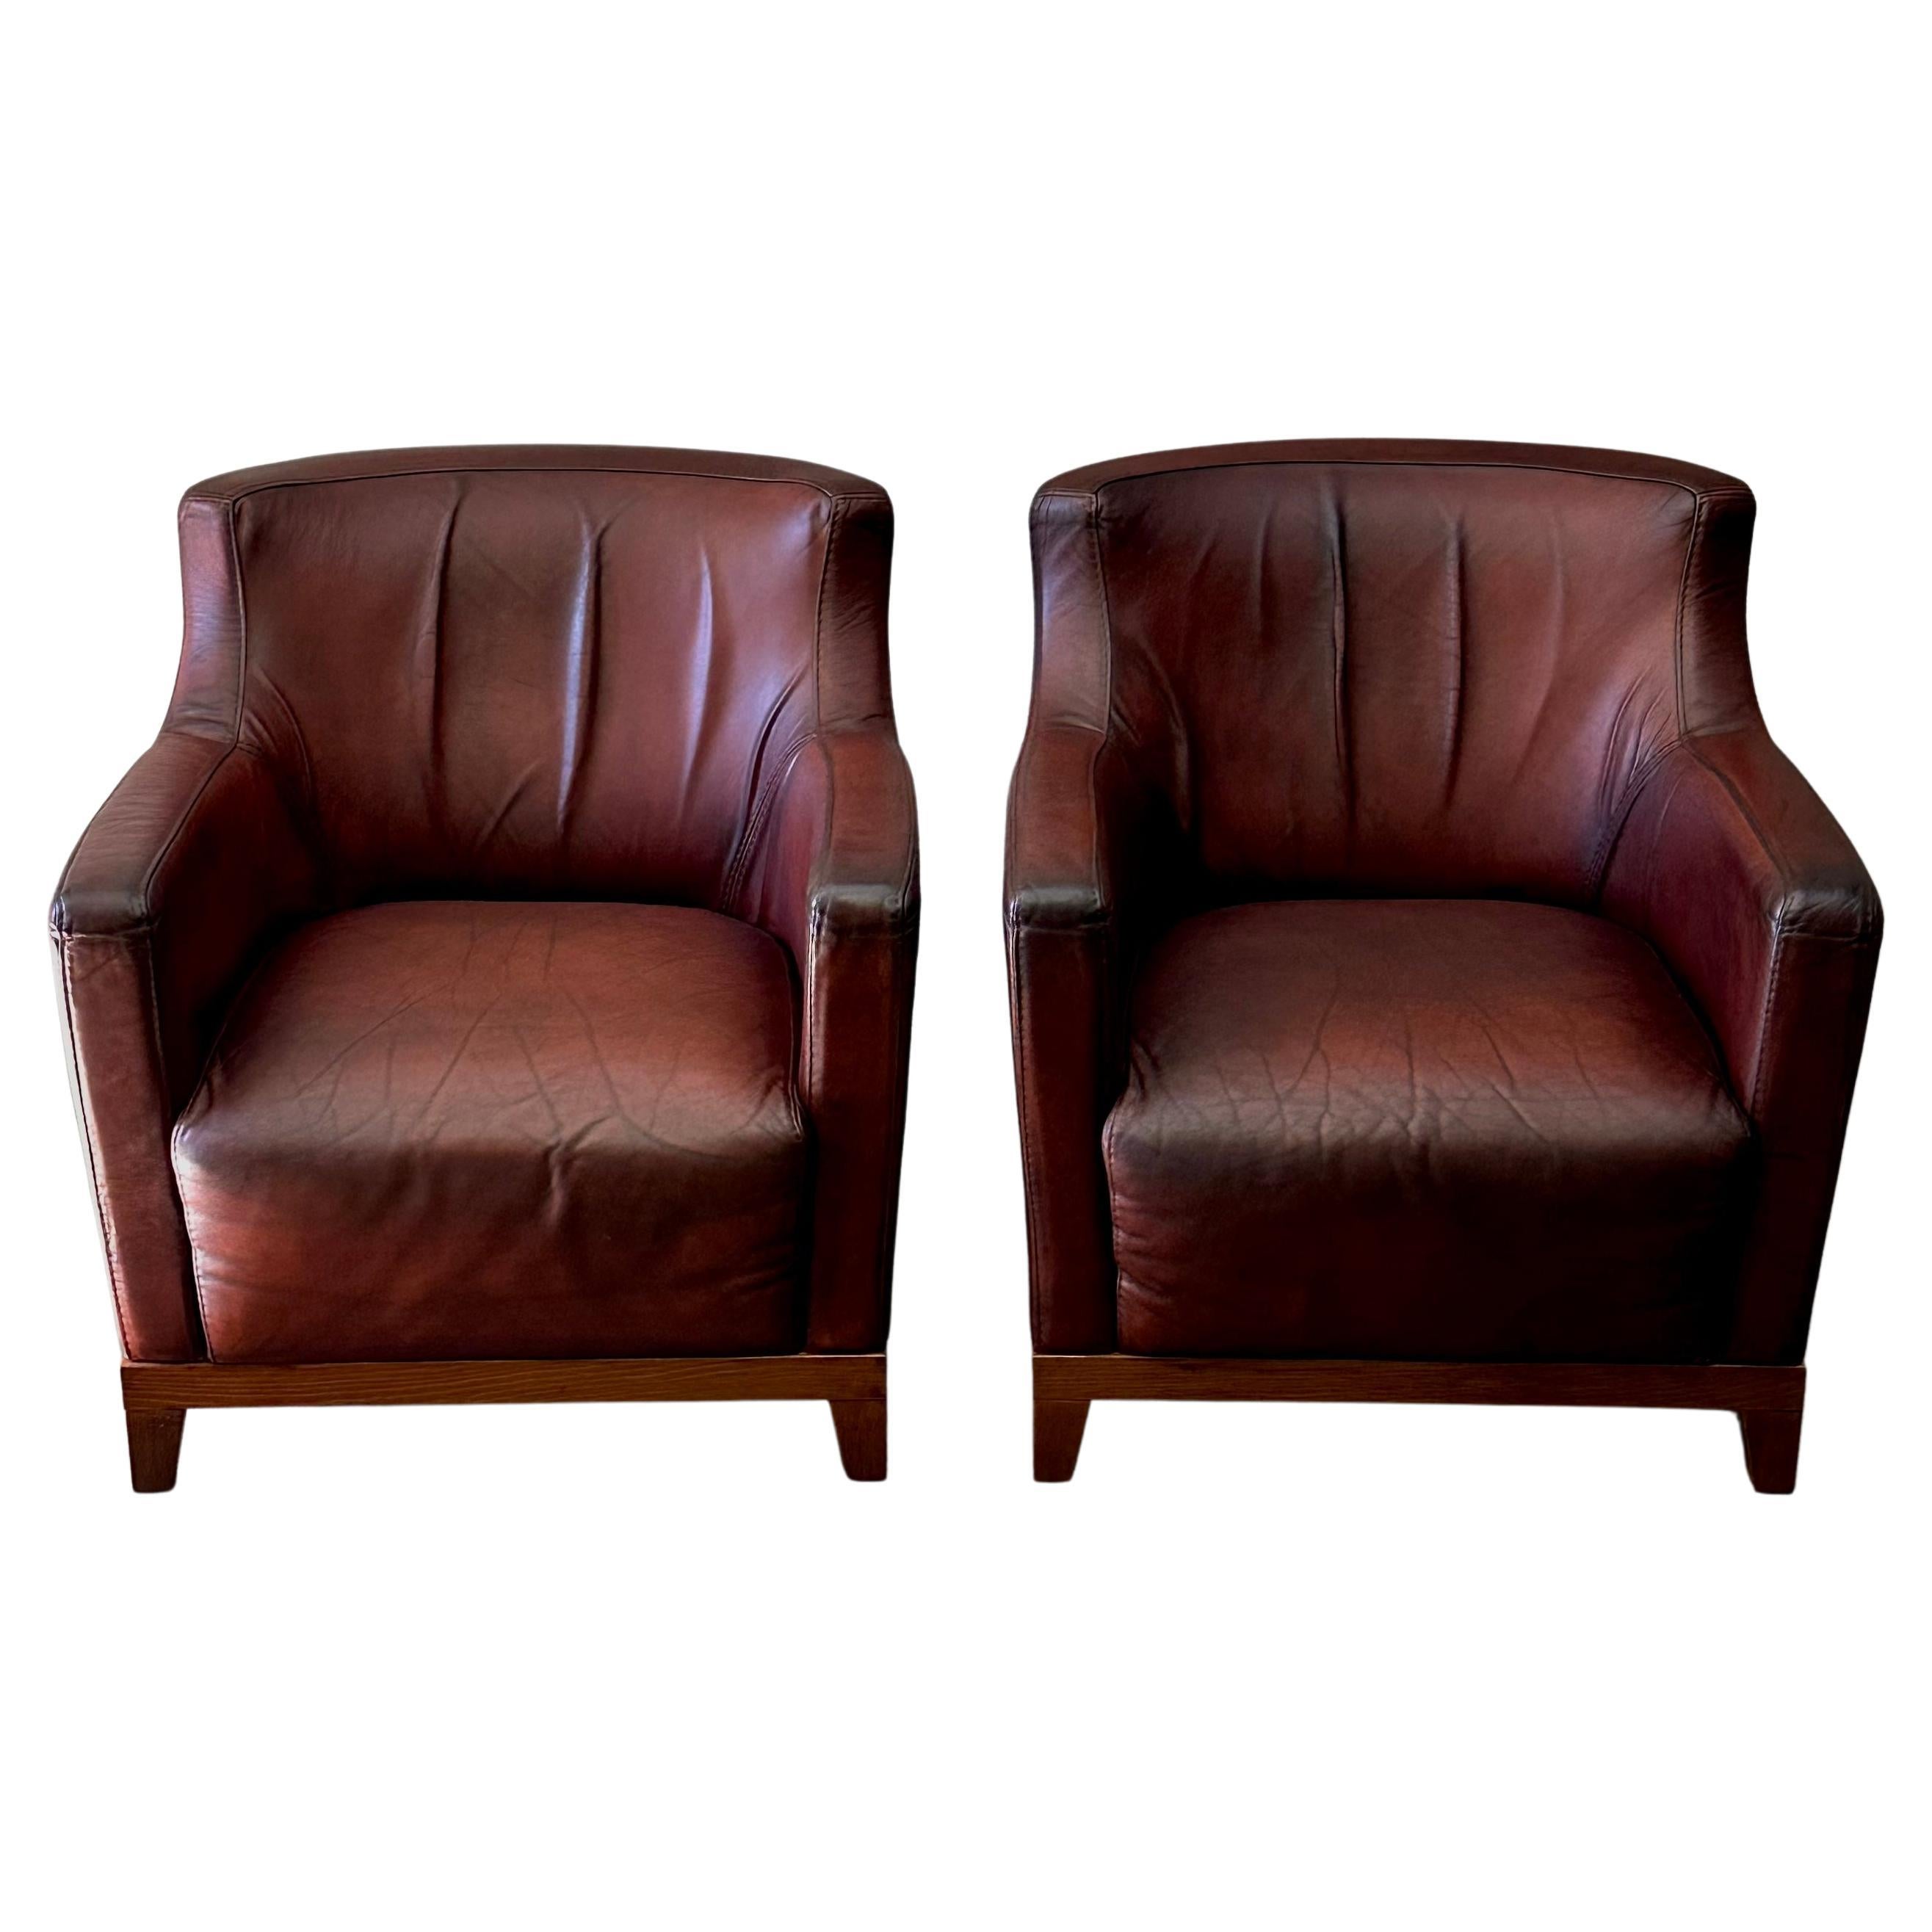 Pair of Dutch Leather Armchairs For Sale